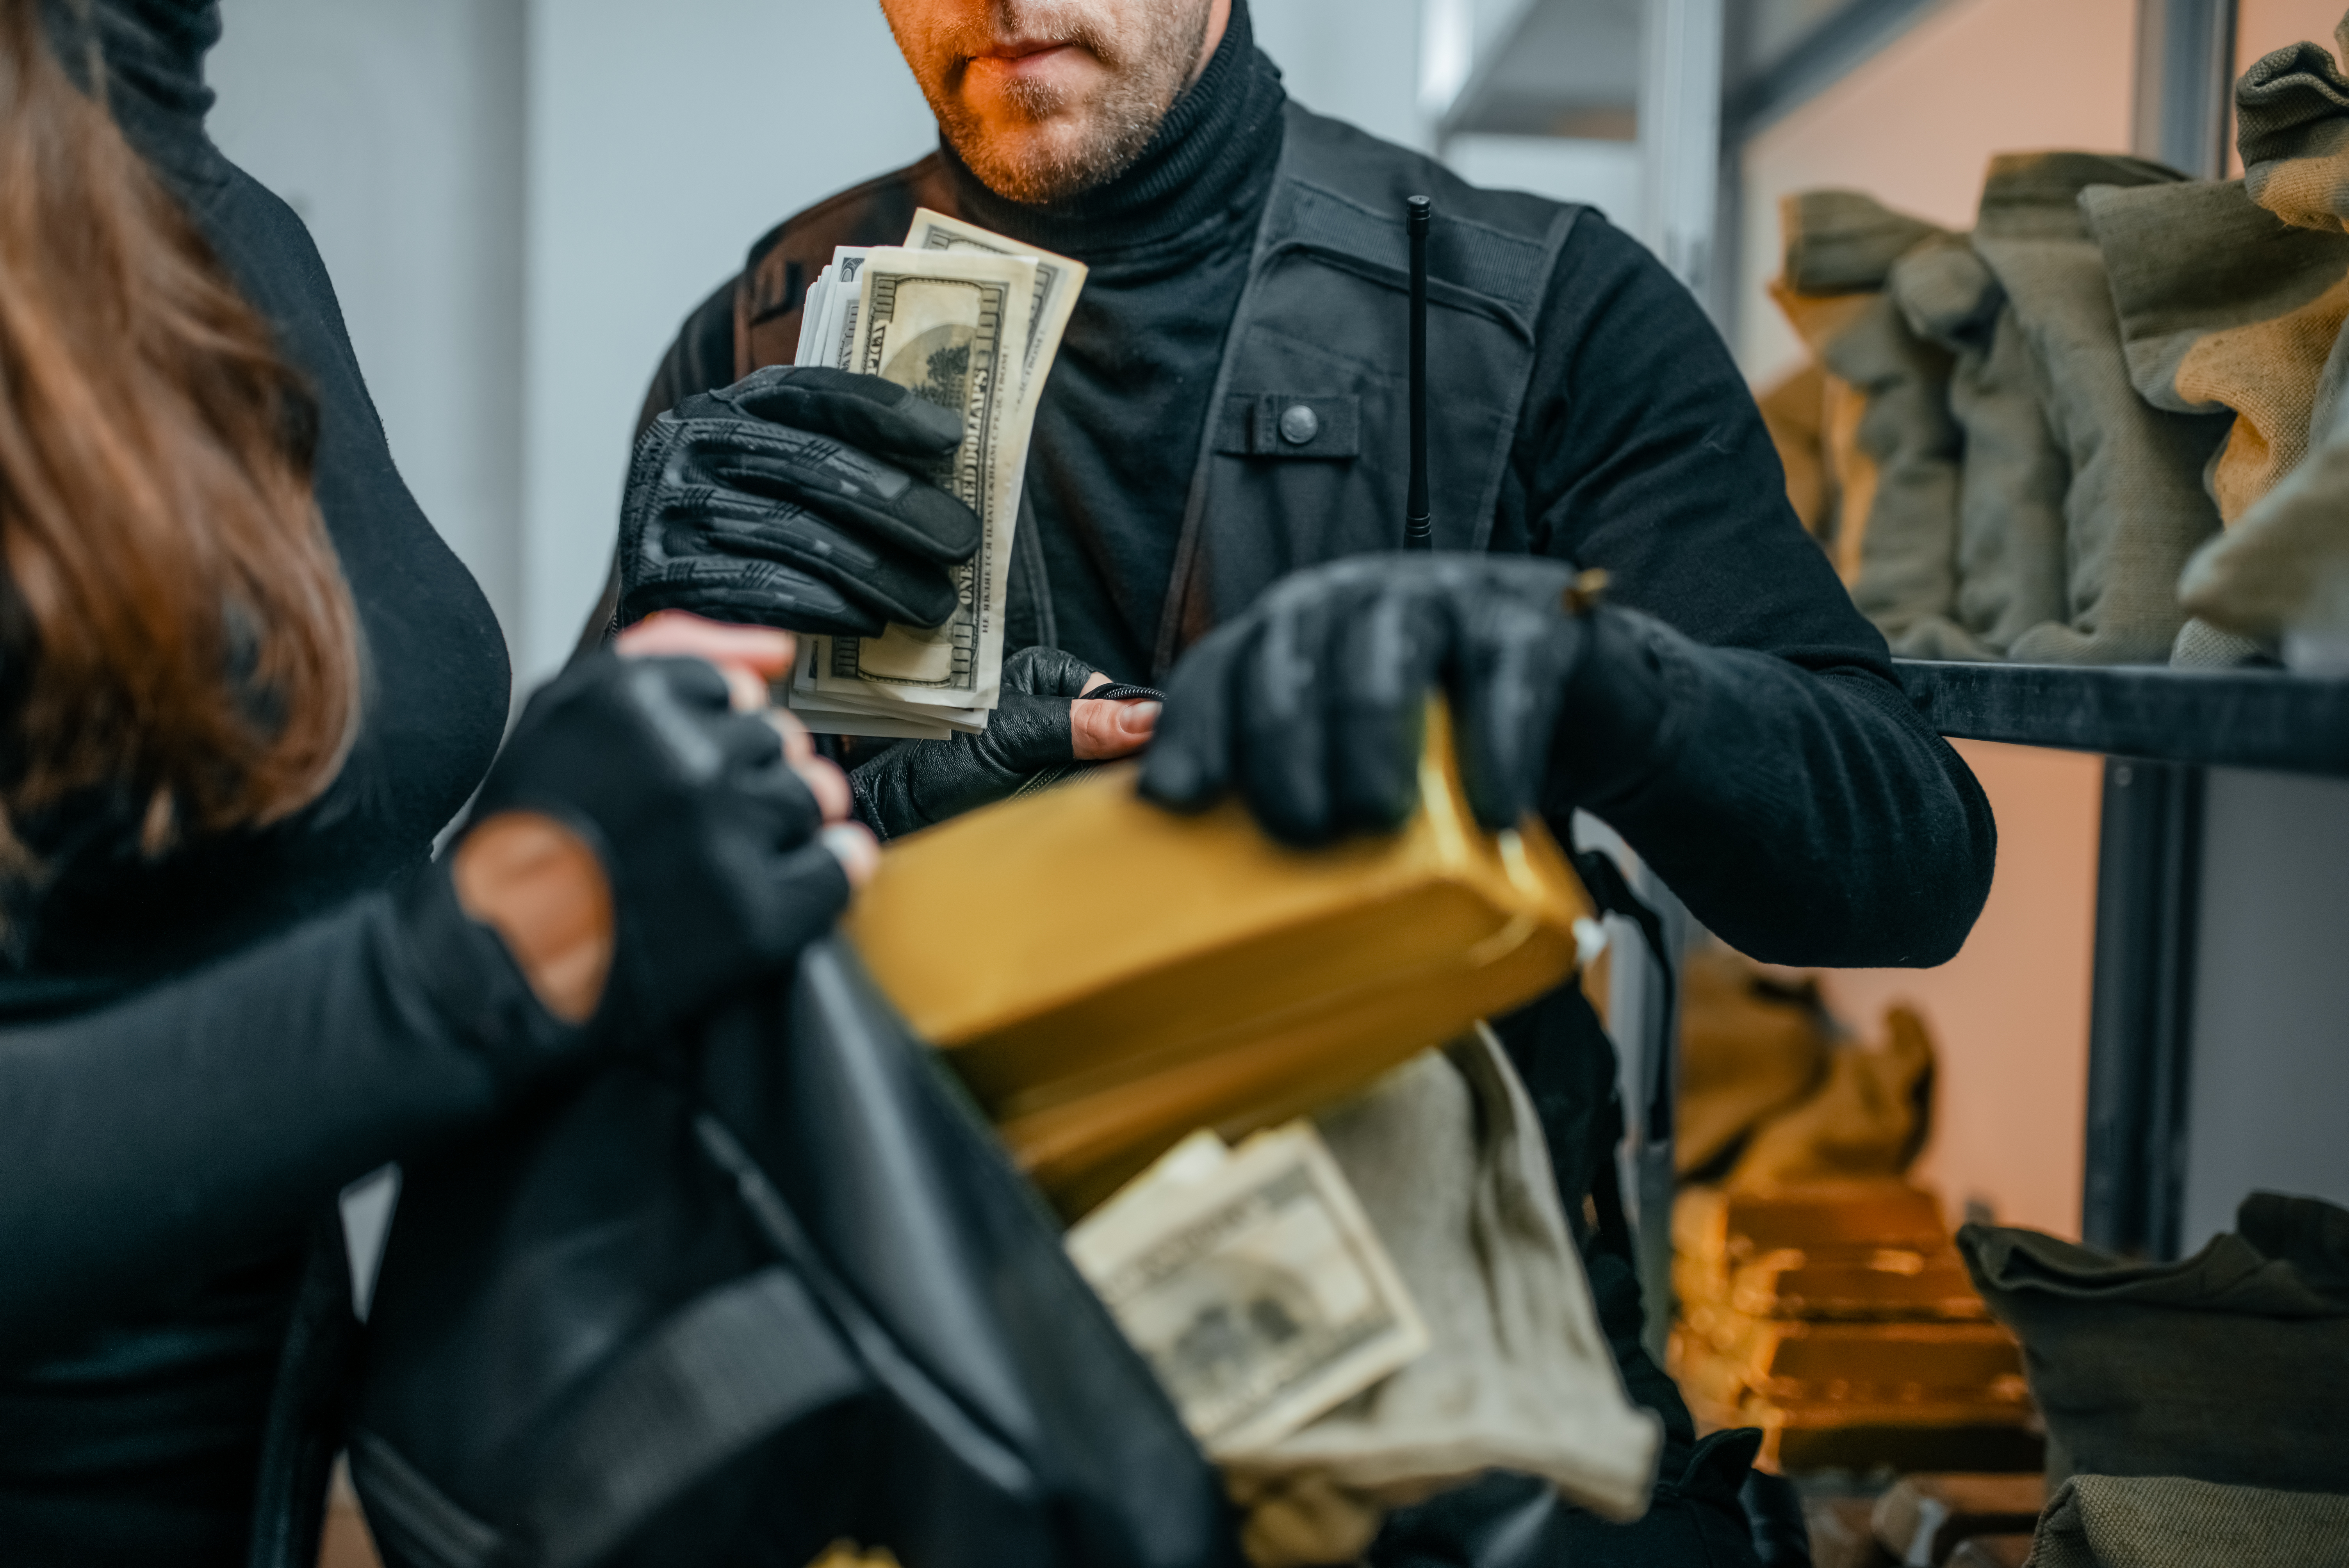 Bank robbery of the century | Source: Shutterstock